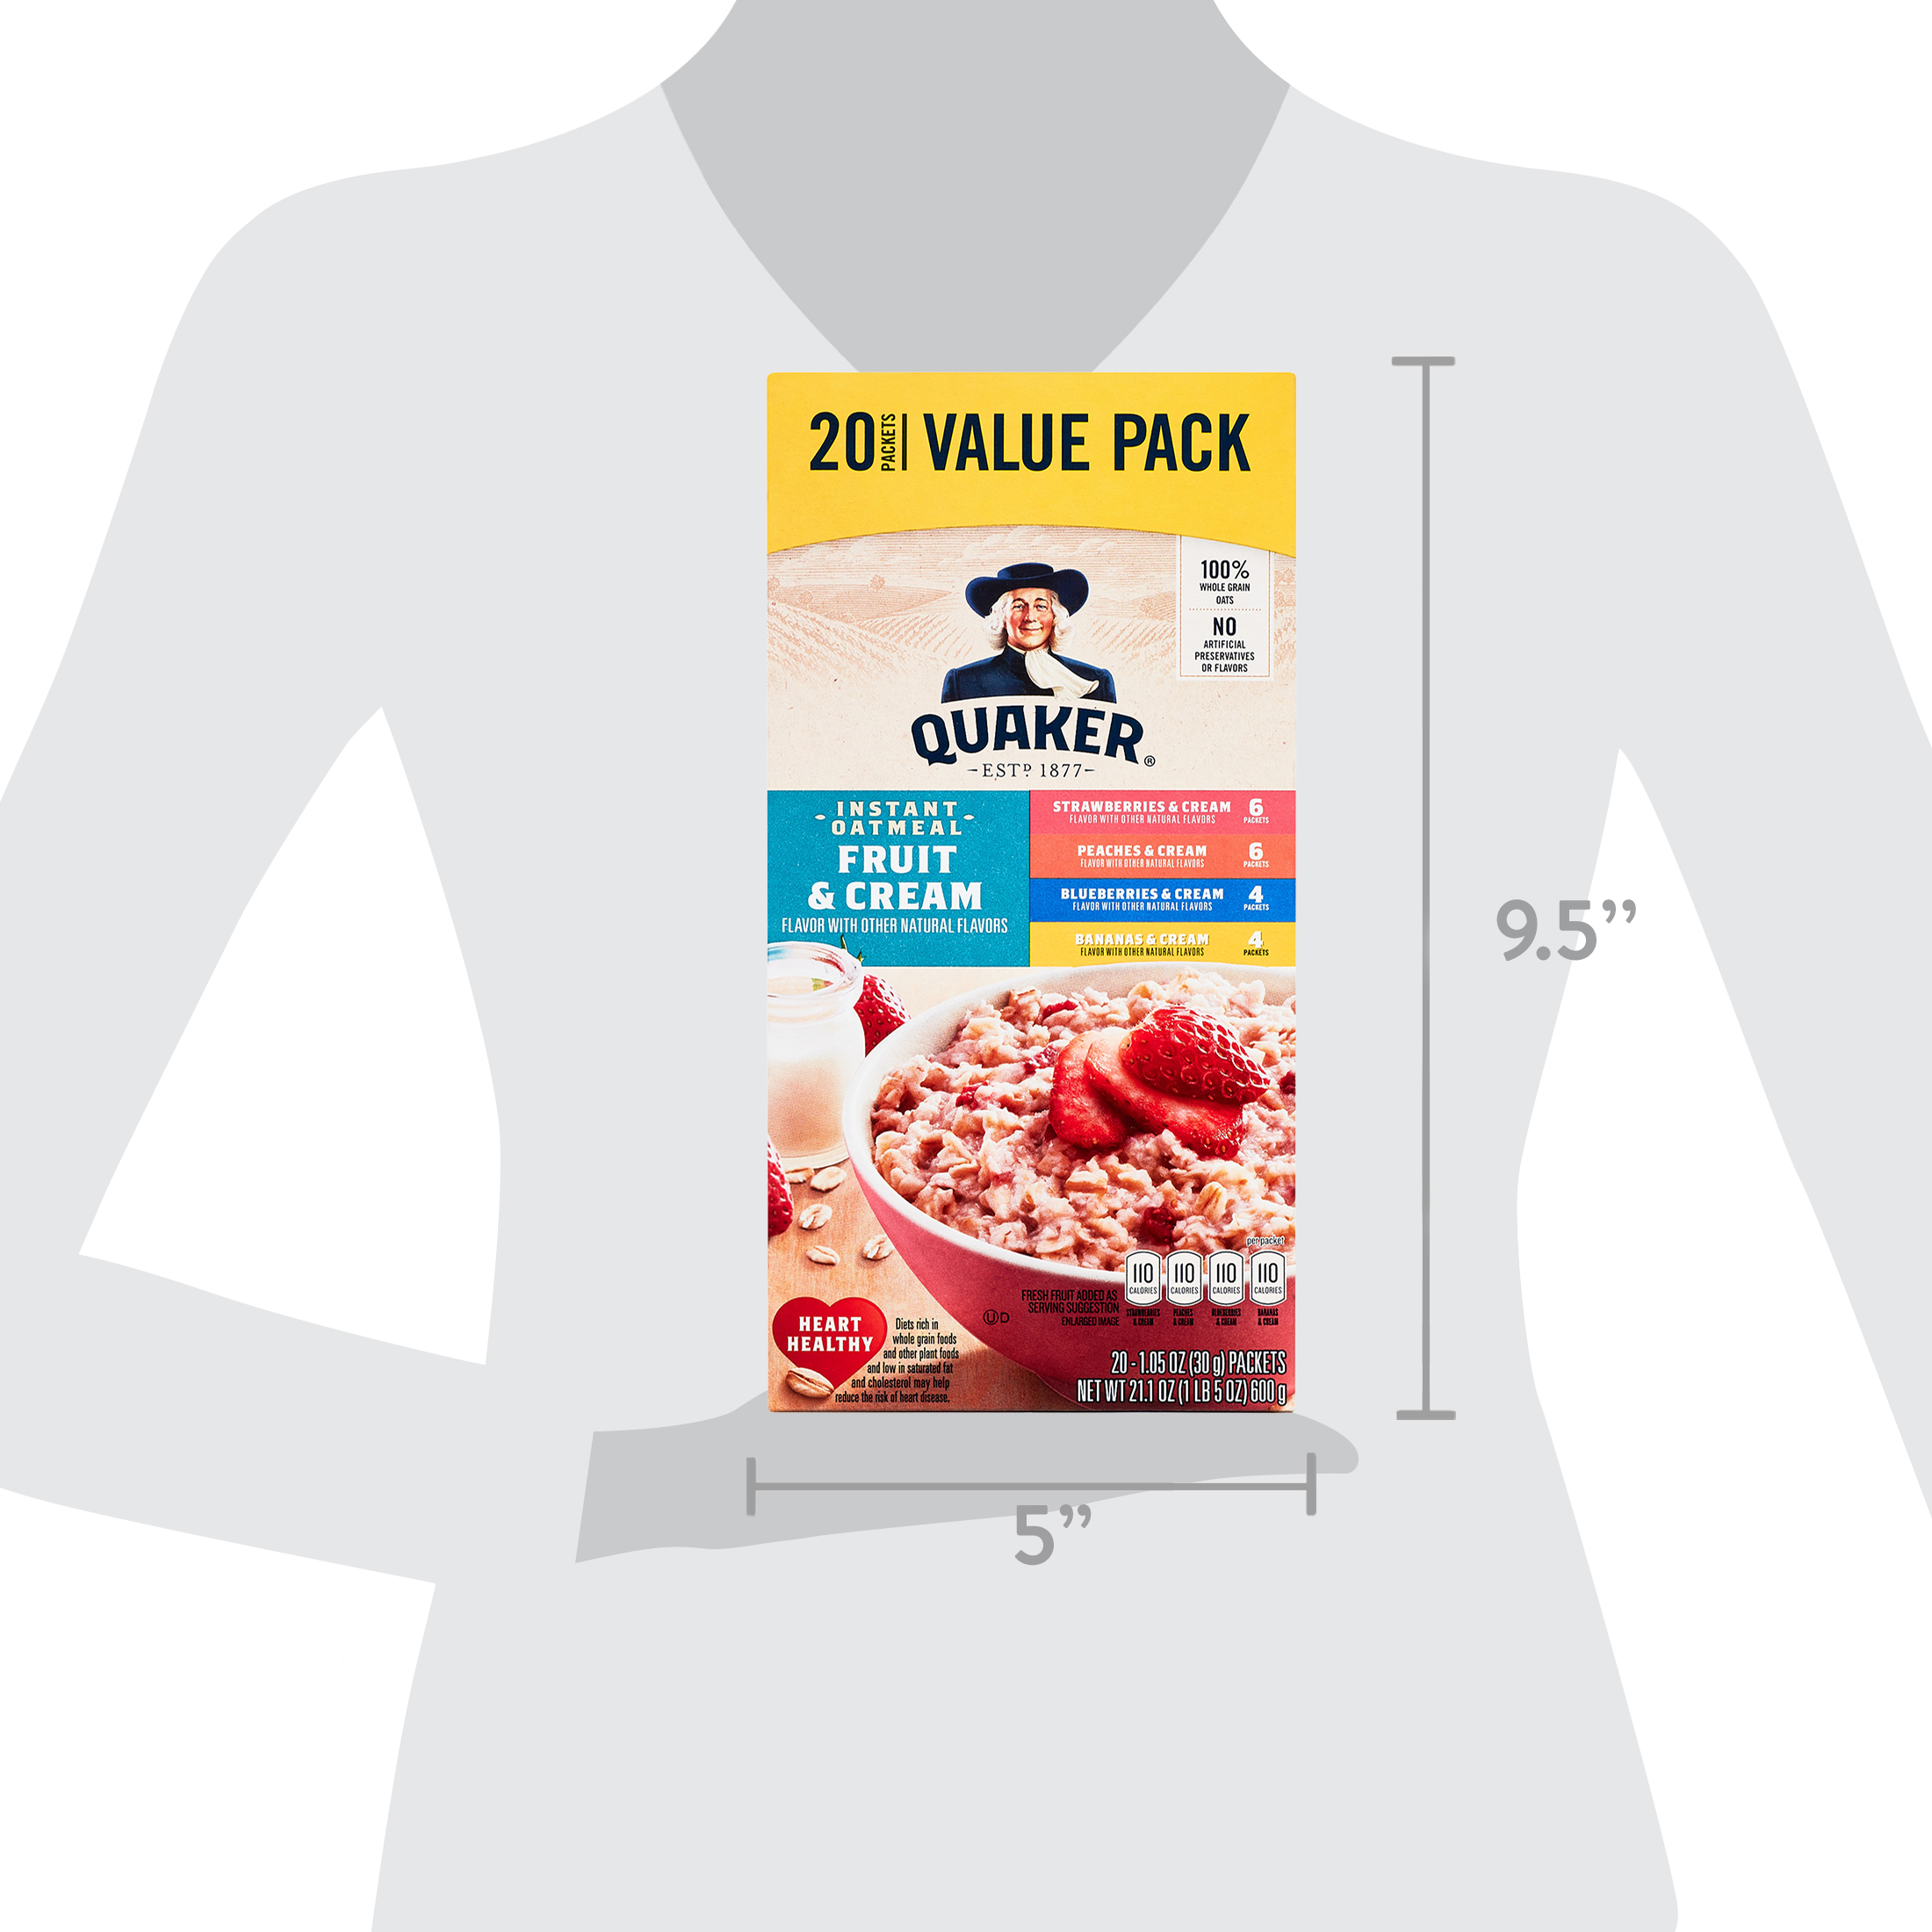 Quaker Instant Oatmeal, Fruit & Cream Variety Pack, Quick Cook Oatmeal, 1.1 oz Packets, 20 Pack - image 12 of 12